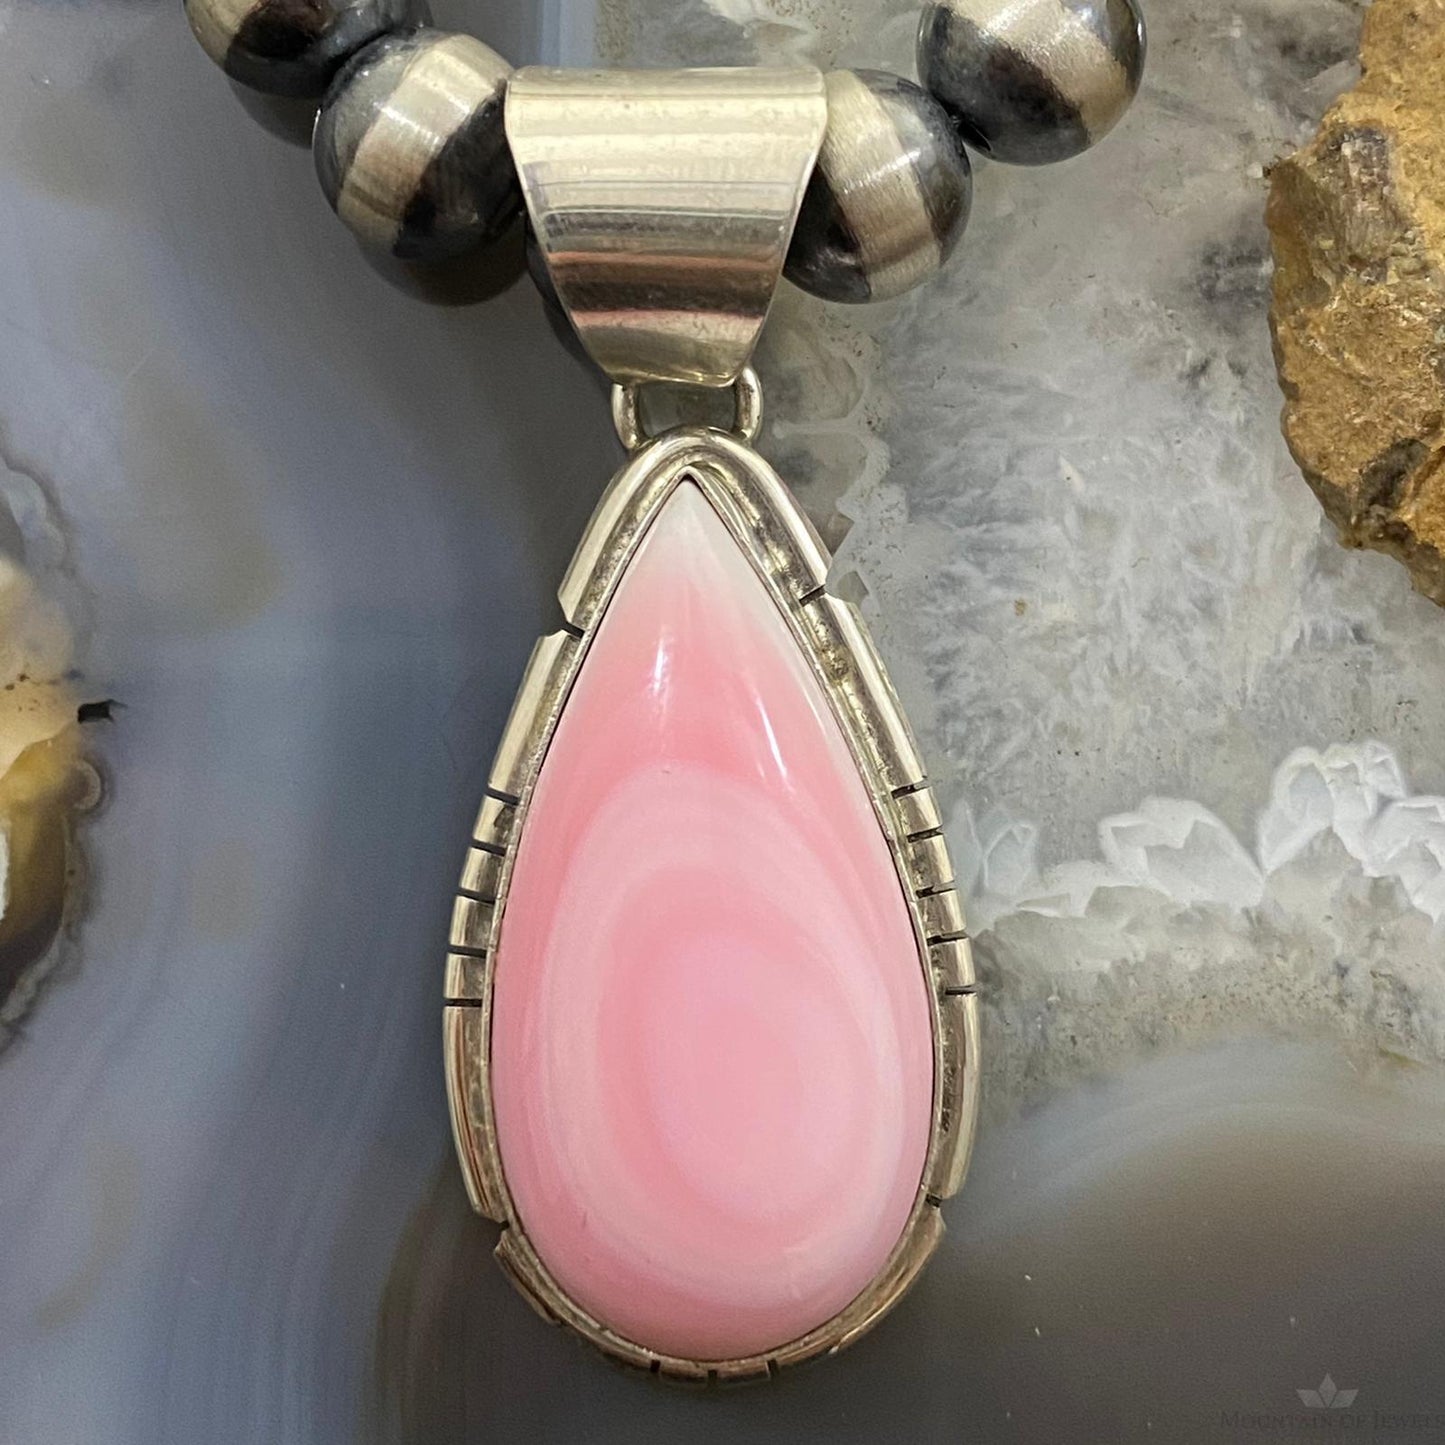 Samson Edsitty Native American Sterling Silver Pink Conch Pendant For Women #2 - Mountain of Jewels